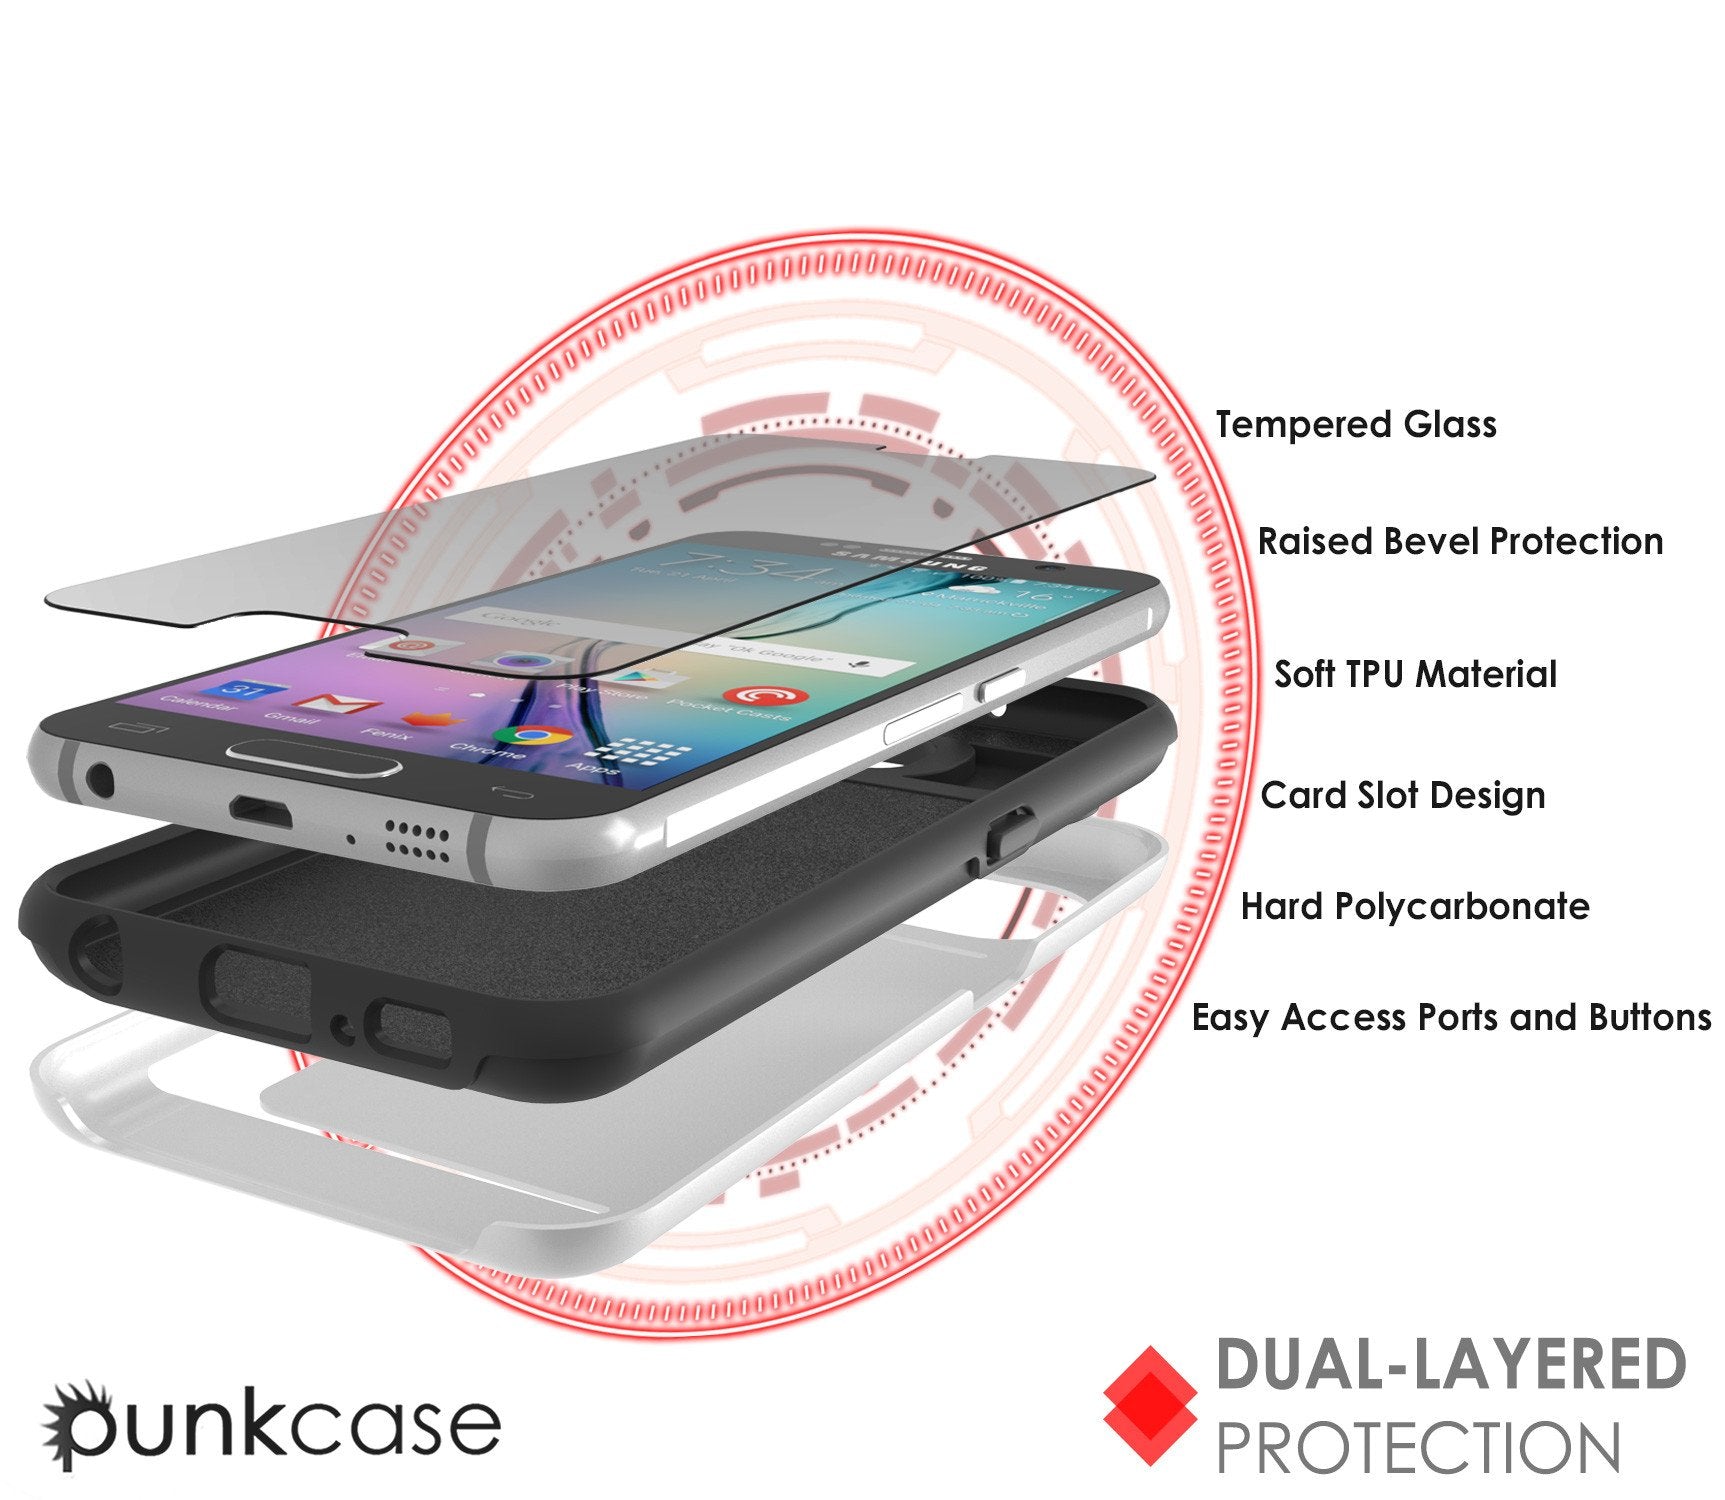 Galaxy s6 Case PunkCase CLUTCH White Series Slim Armor Soft Cover Case w/ Tempered Glass - PunkCase NZ